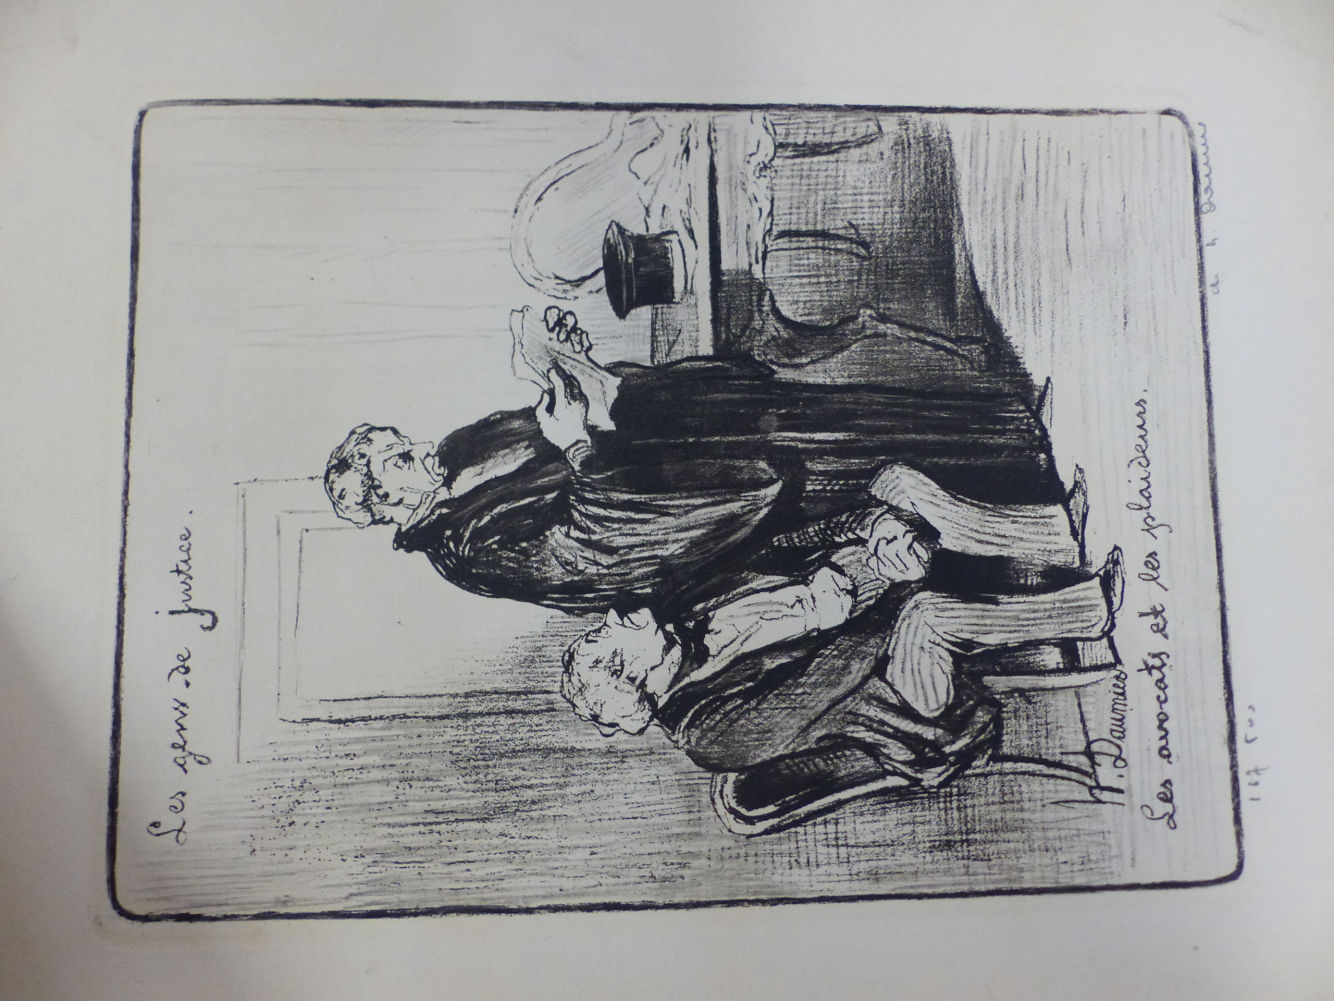 AFTER H DAUMIER, THREE VINTAGE PRINTS OF LEGAL SUBJECTS. LARGEST 39 x 30cms. ALL UNFRAMED (3) - Image 3 of 3